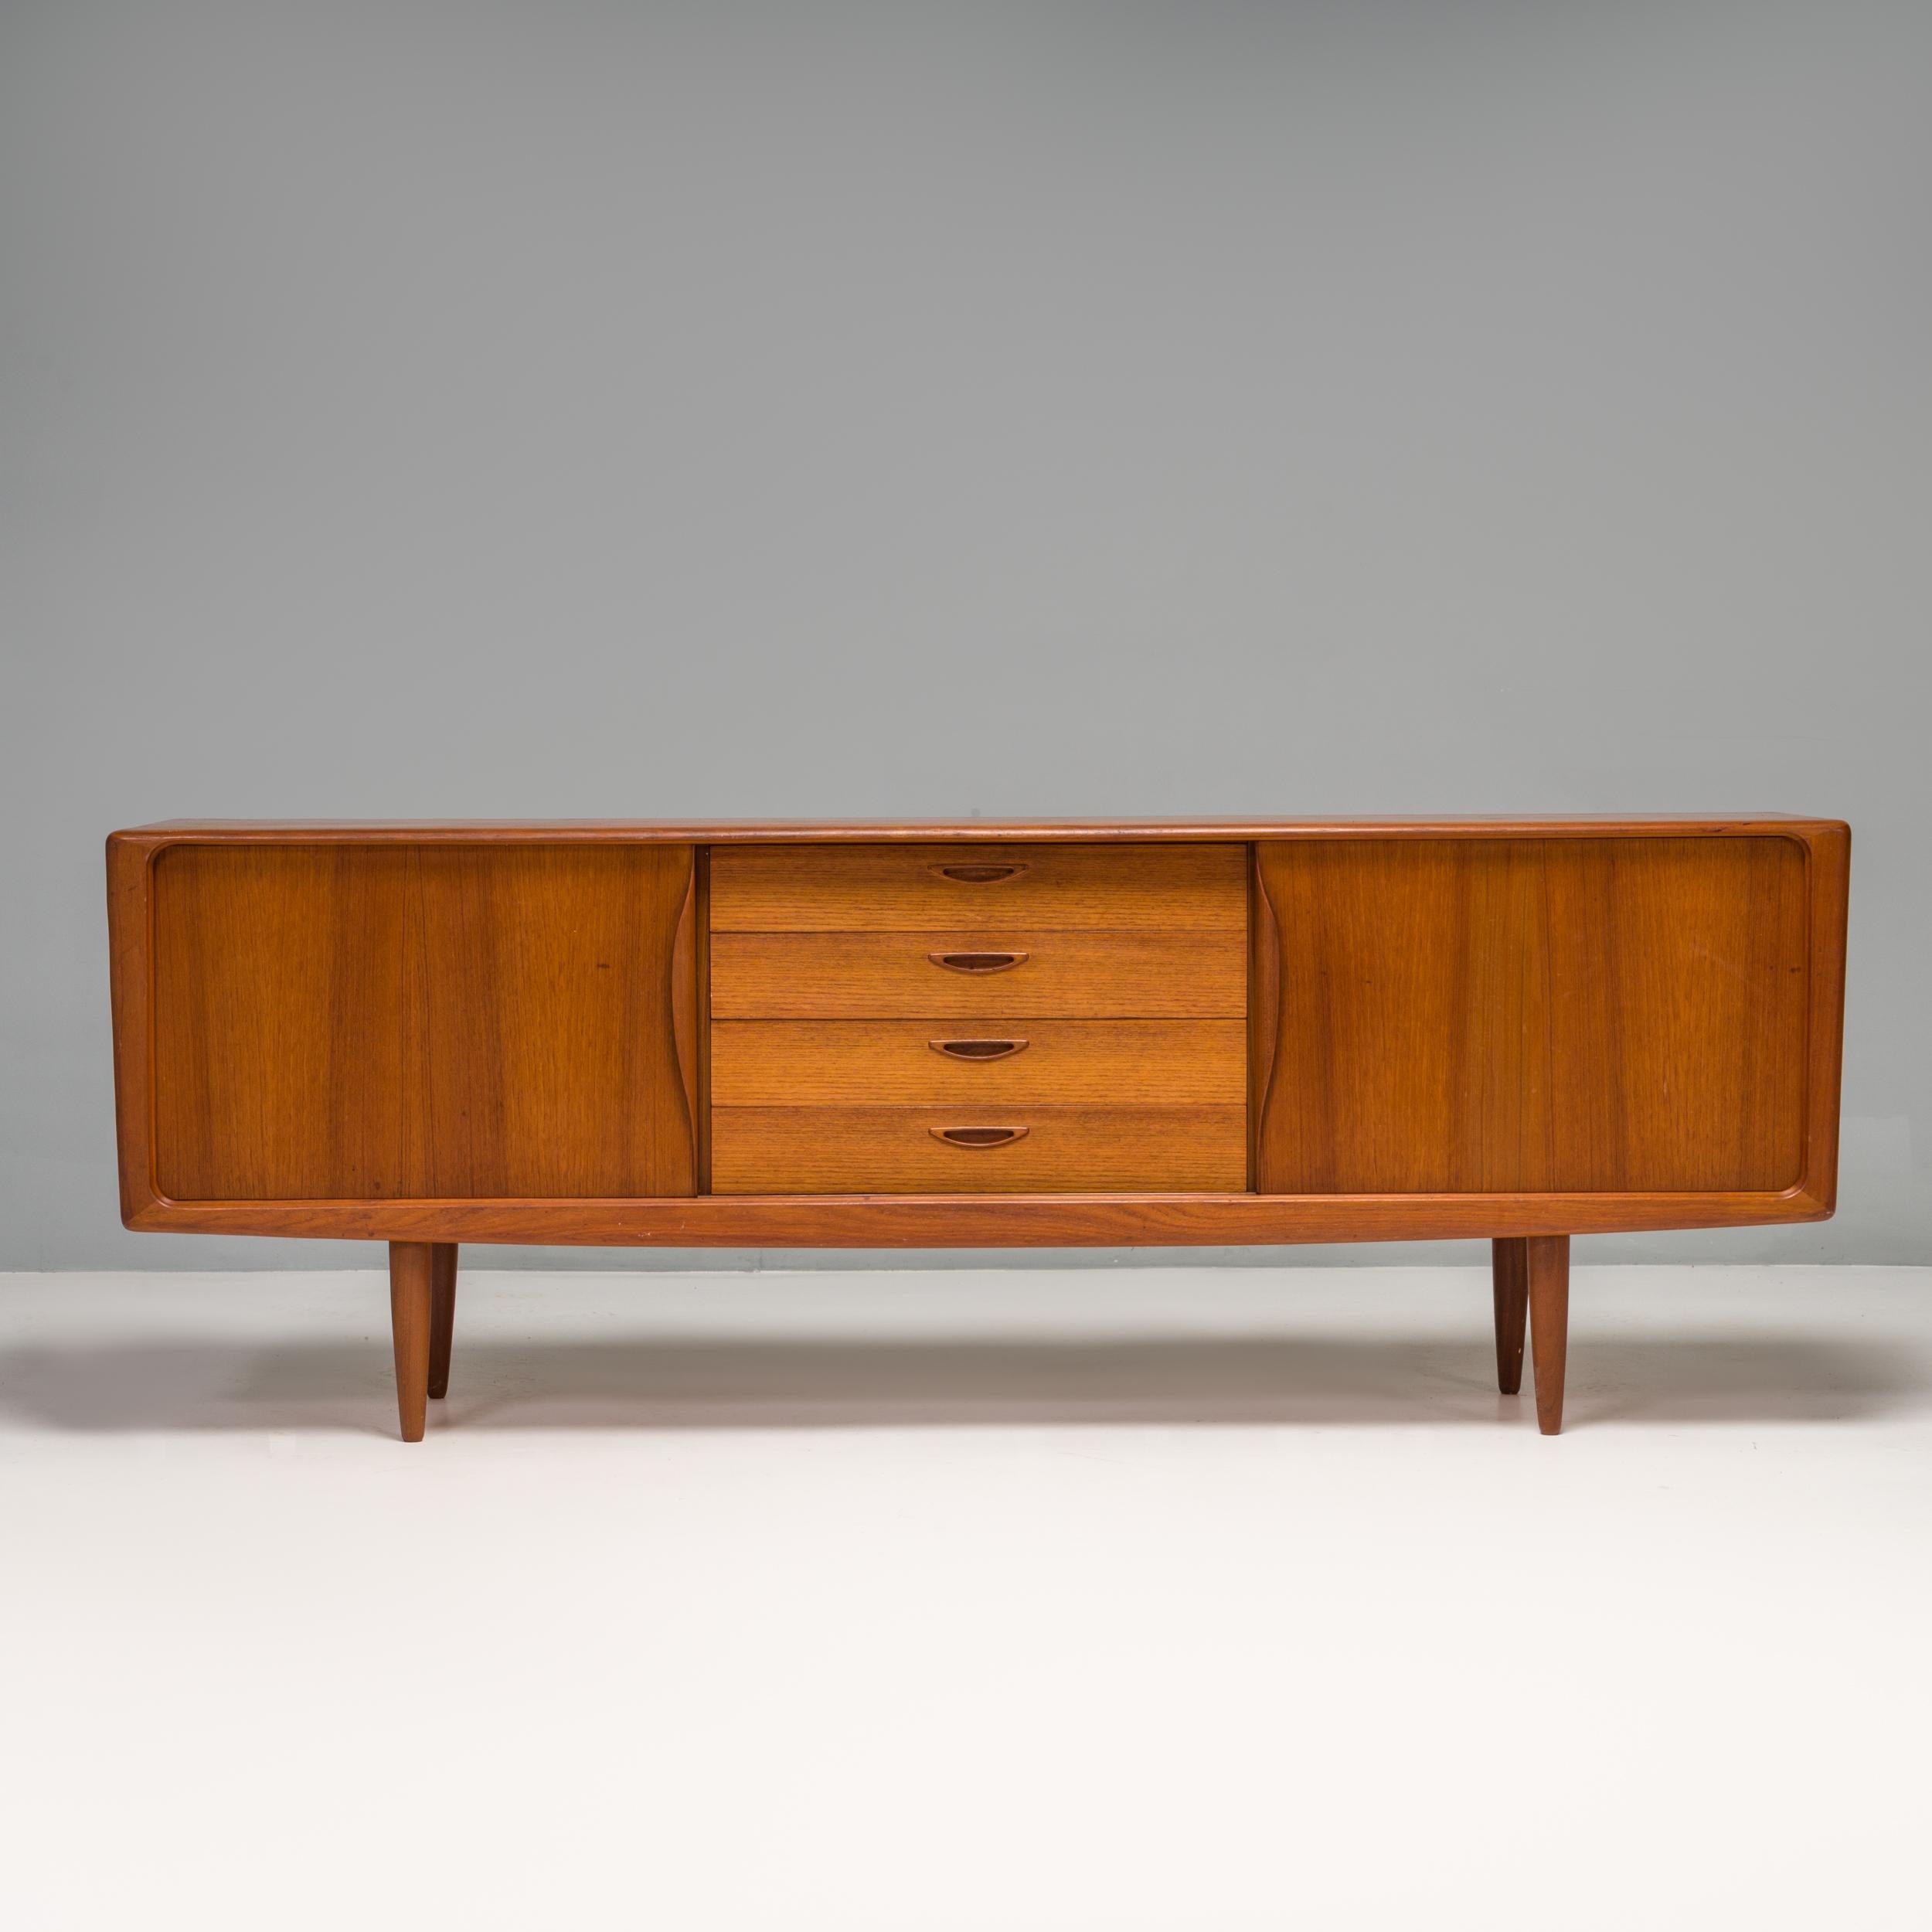 Designed by Norwegian designer H.W. Klein and made by Danish manufacturer Bramin, this 1960s sideboard is a fantastic example of mid century Scandinavian design.

Constructed from teak wood, the sideboard features two compartments at either side,